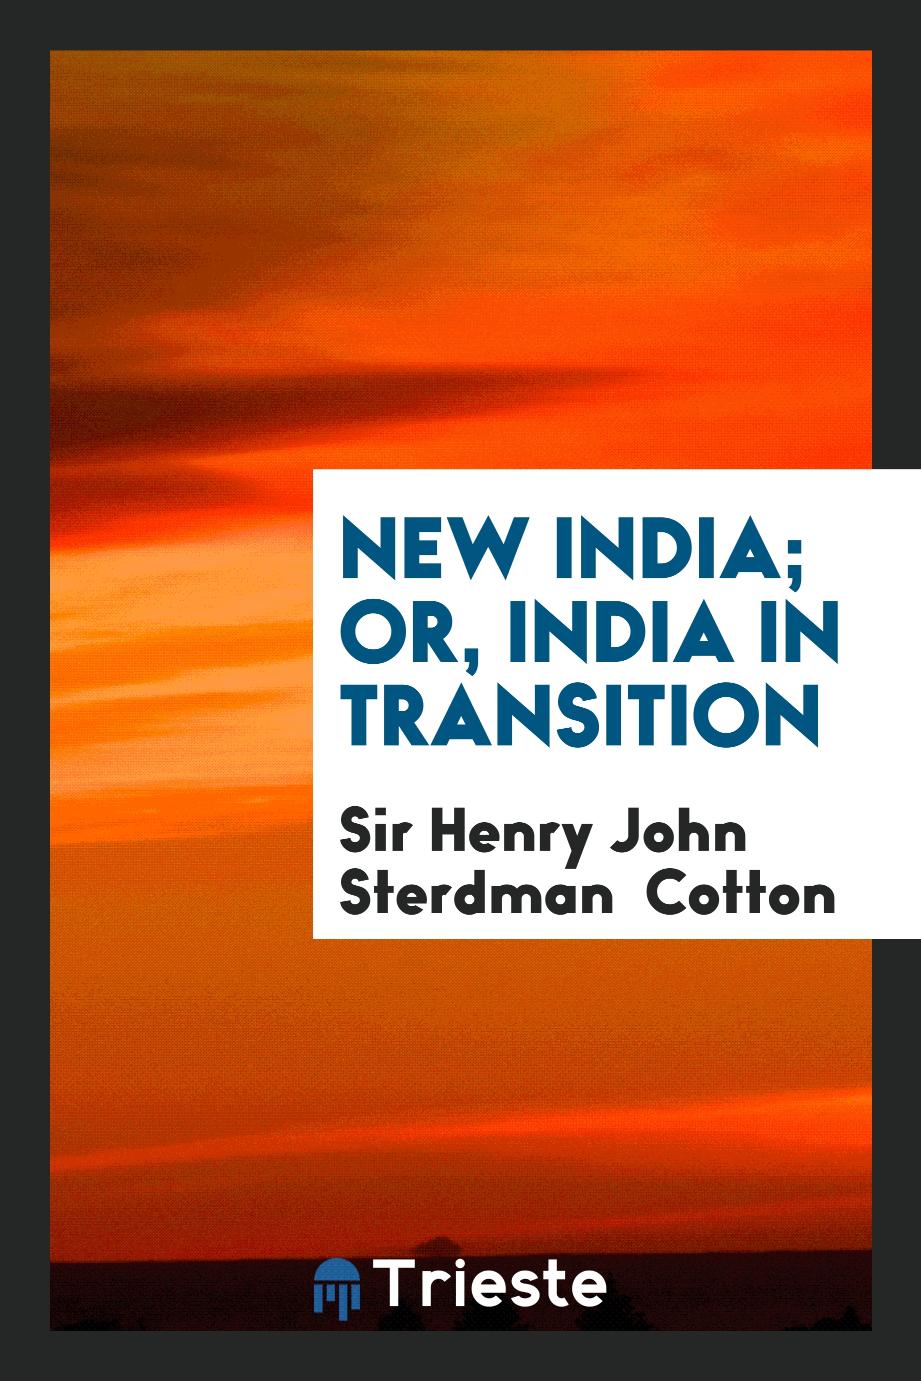 New India; or, India in transition